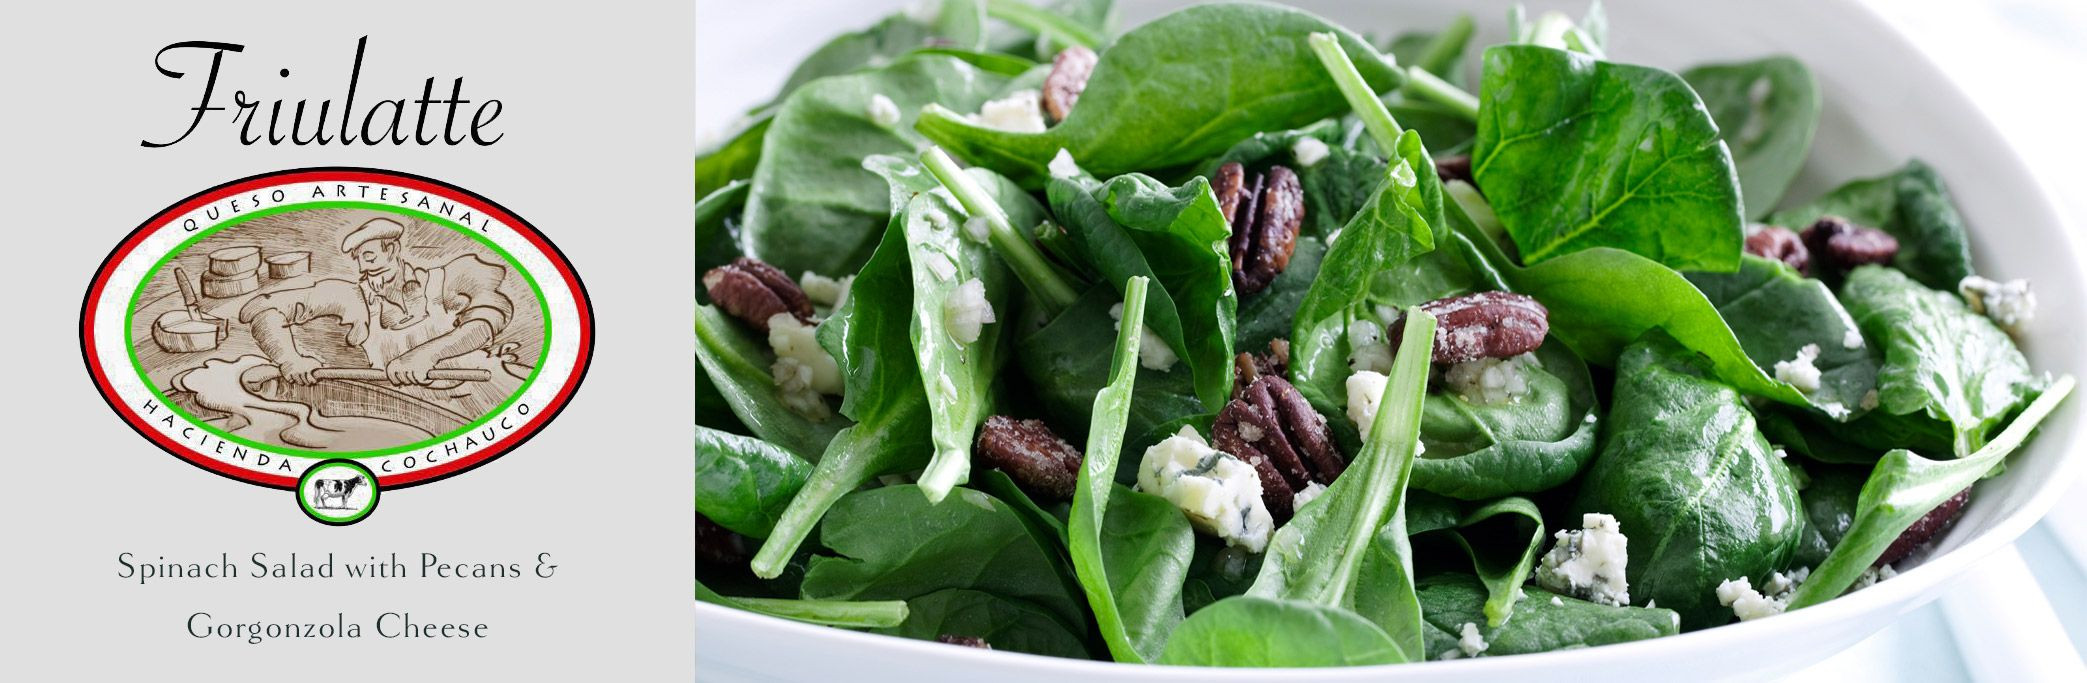 Easter Salads Food Network
 Spinach Salad with Pecans & Gorgonzola